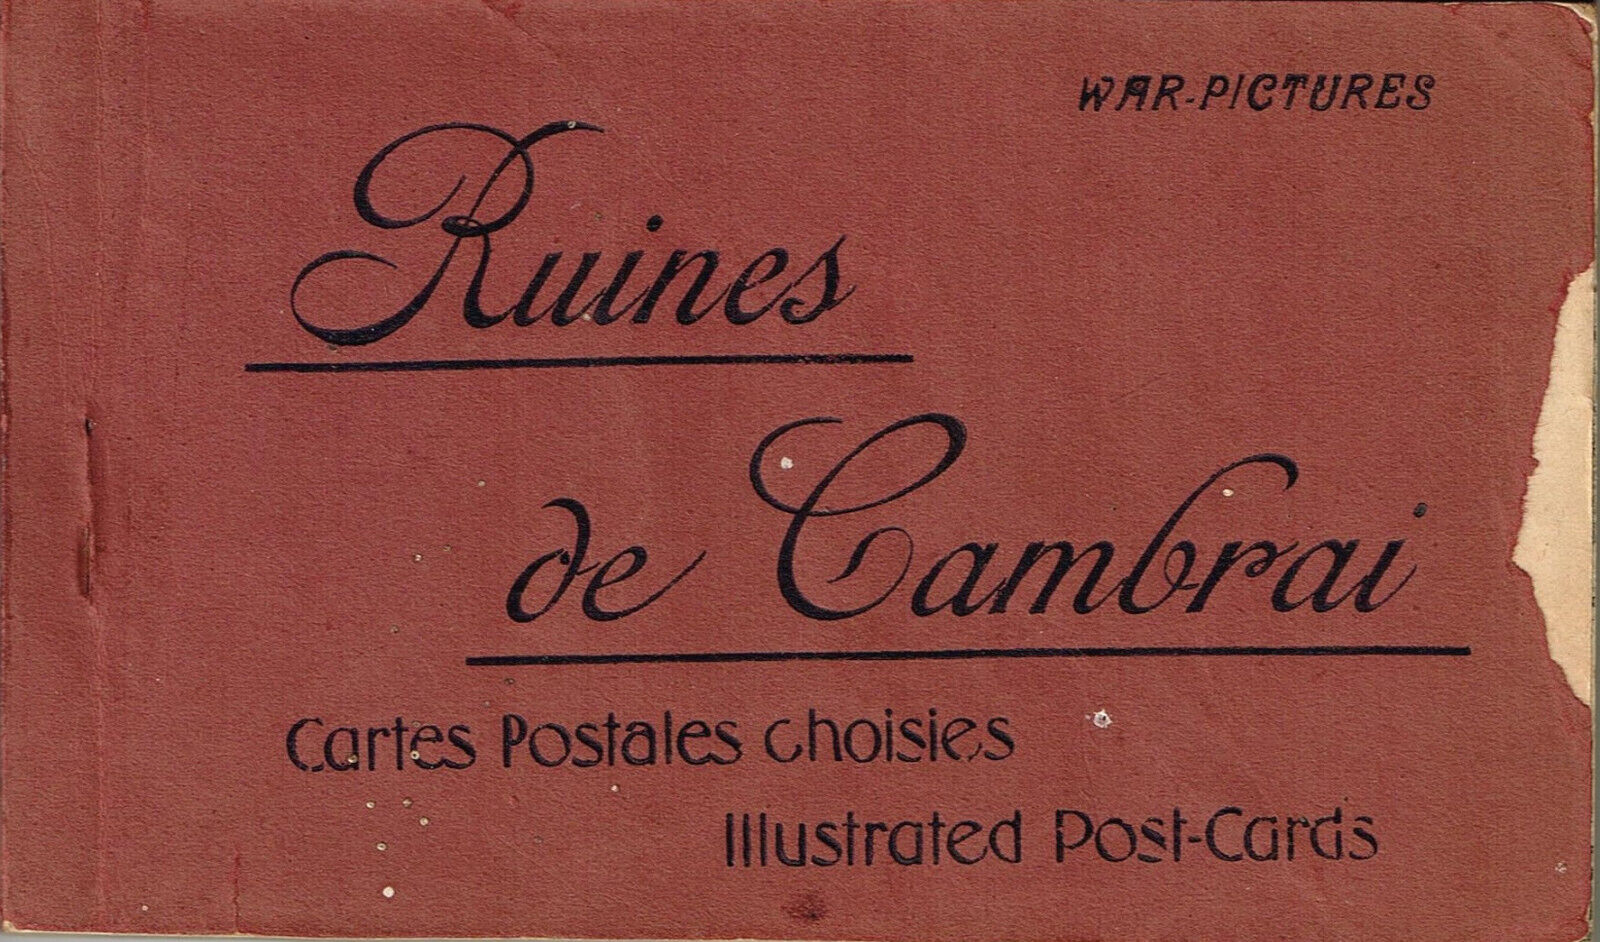 Ruines de Cambrai Ruins of Cambrai 1918 20 War Pictures Booklet of Post Cards